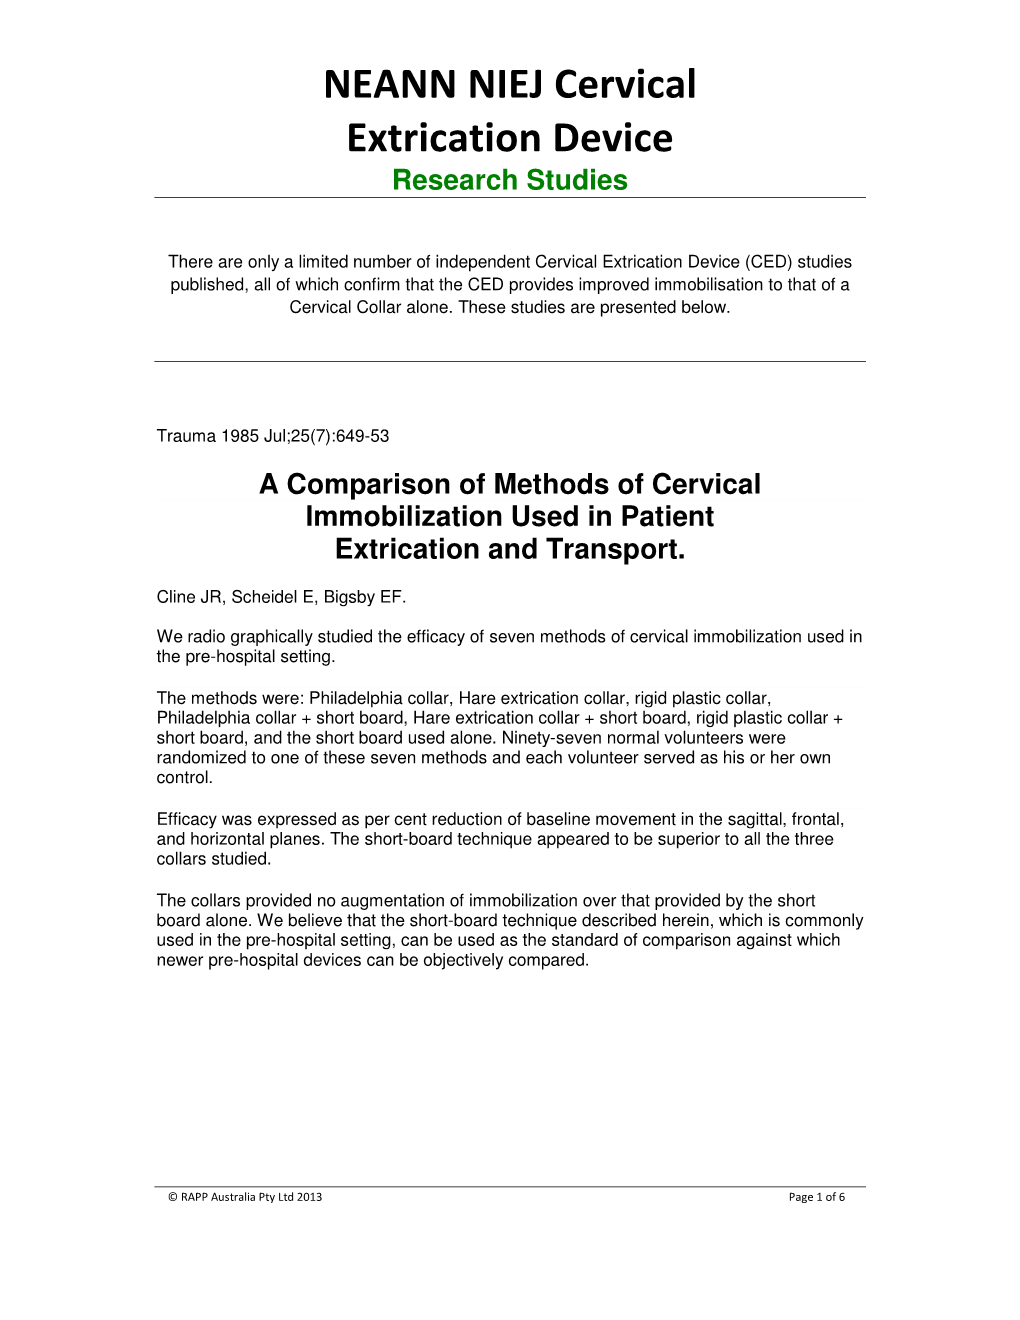 NEANN NIEJ Cervical Extrication Device Research Studies